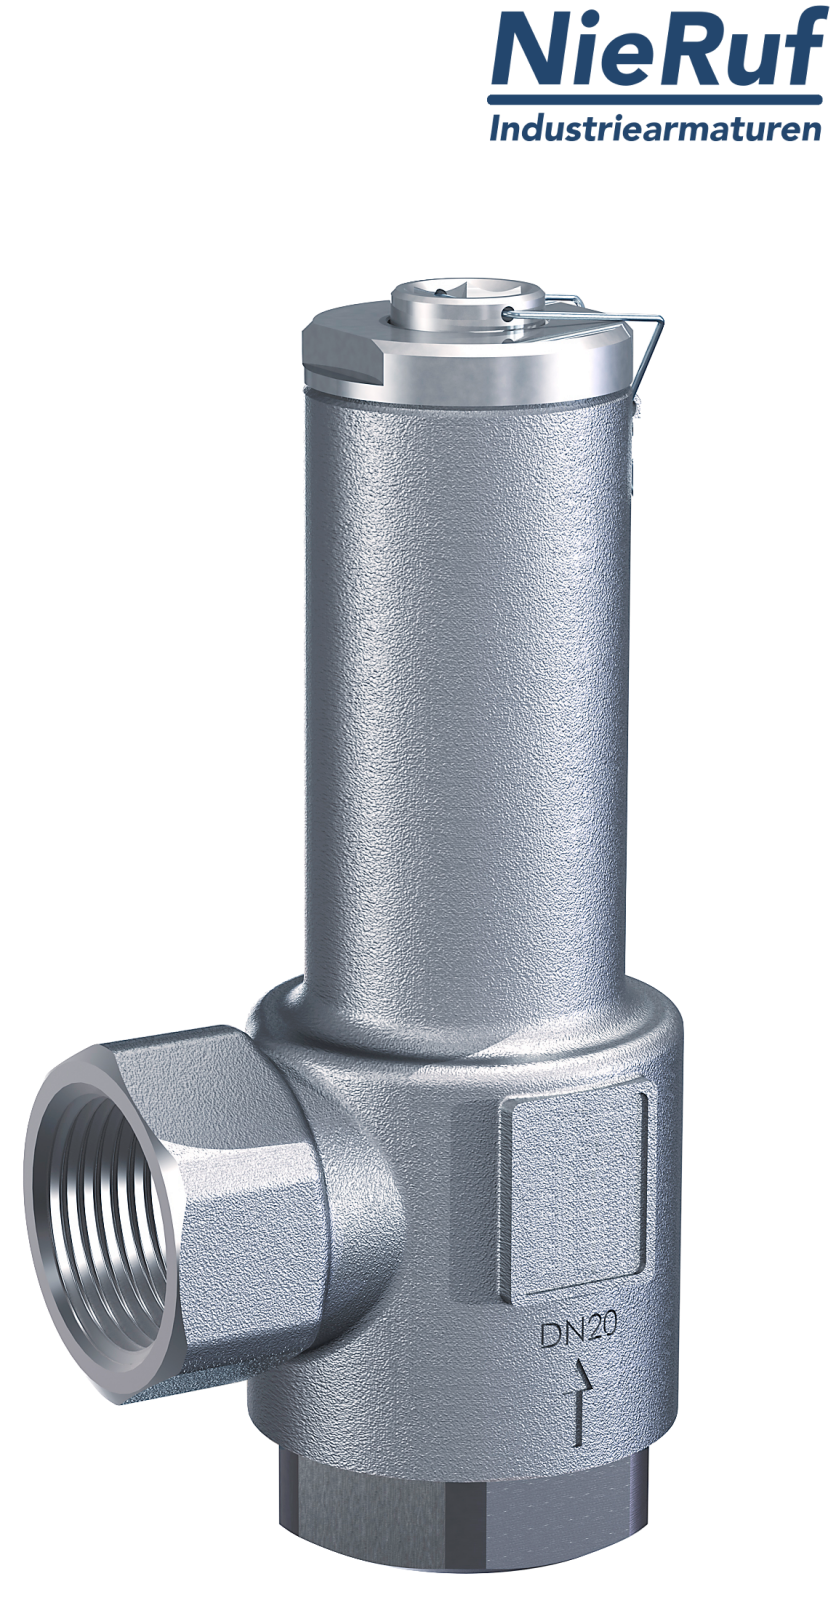 angle-type overflow valve 3/4" inch fm UV03 stainless steel AISI 316L 0,5 - 2,5 bar